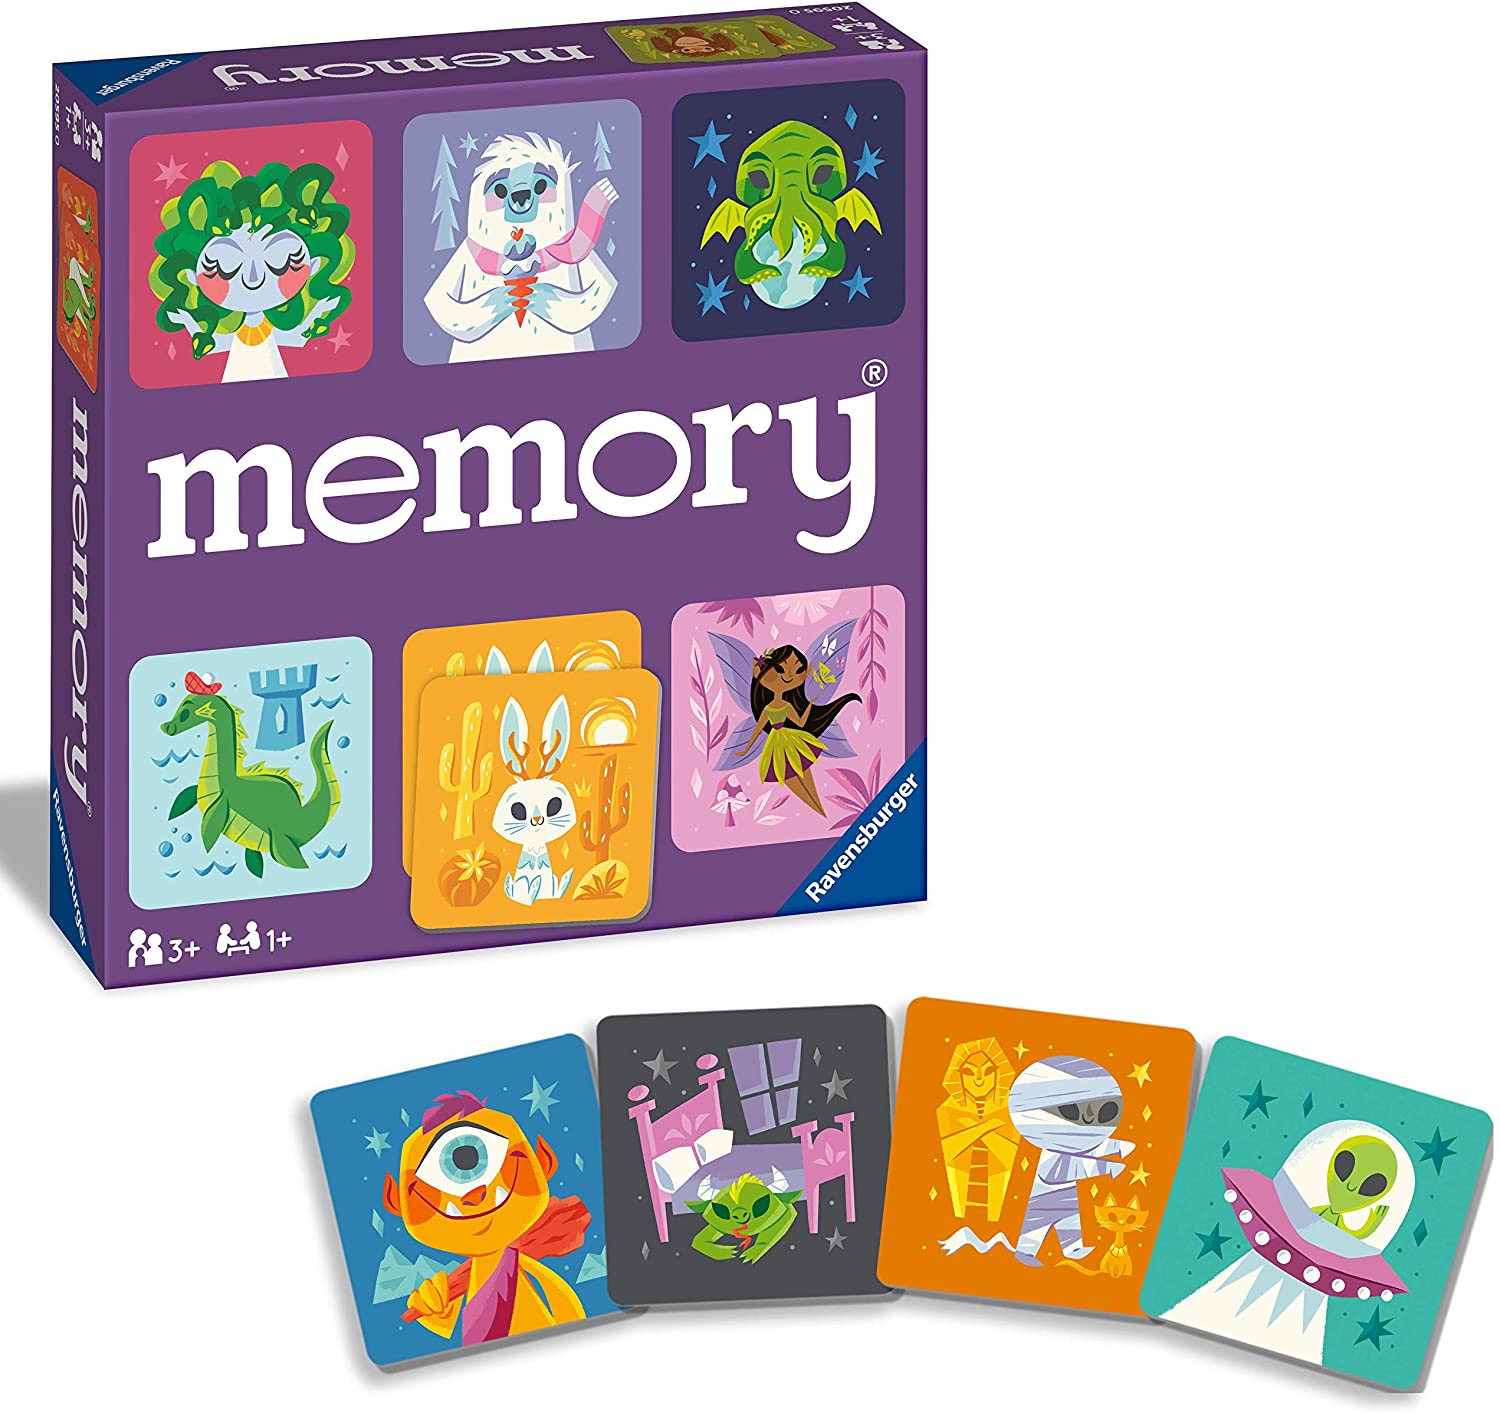 Monster cards for memory game in front of box